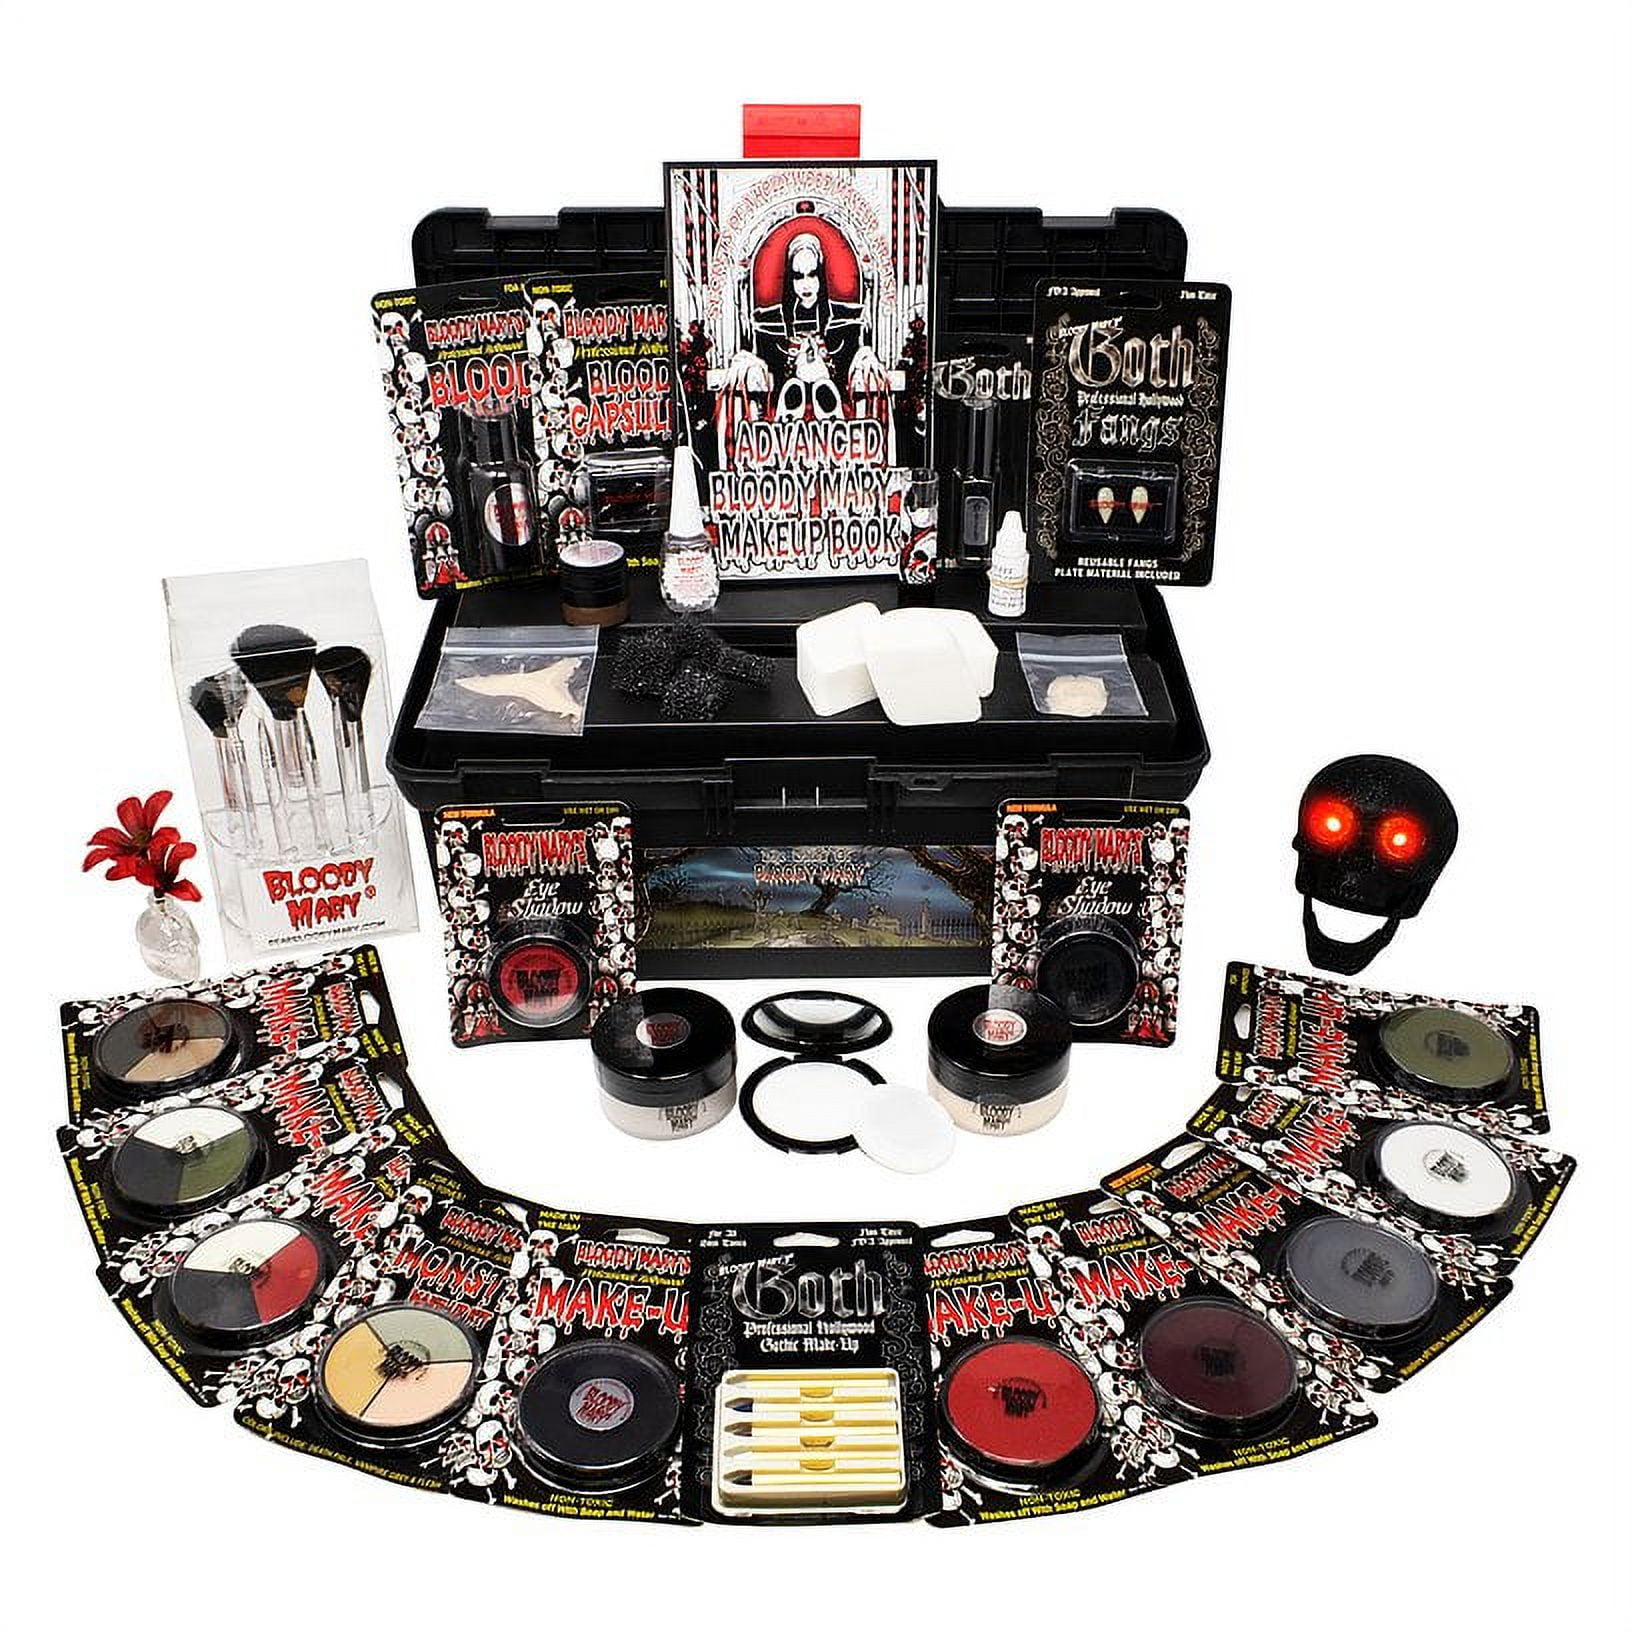 Zombie Makeup Kit By Bloody Mary - Halloween Costume Special Effects  Palette - Walking Dead FX Makeup Tools - 5 Crayons, Blood, Setting Powder,  4 Application Brushes, 1 Sponge - Carrying Case Included 